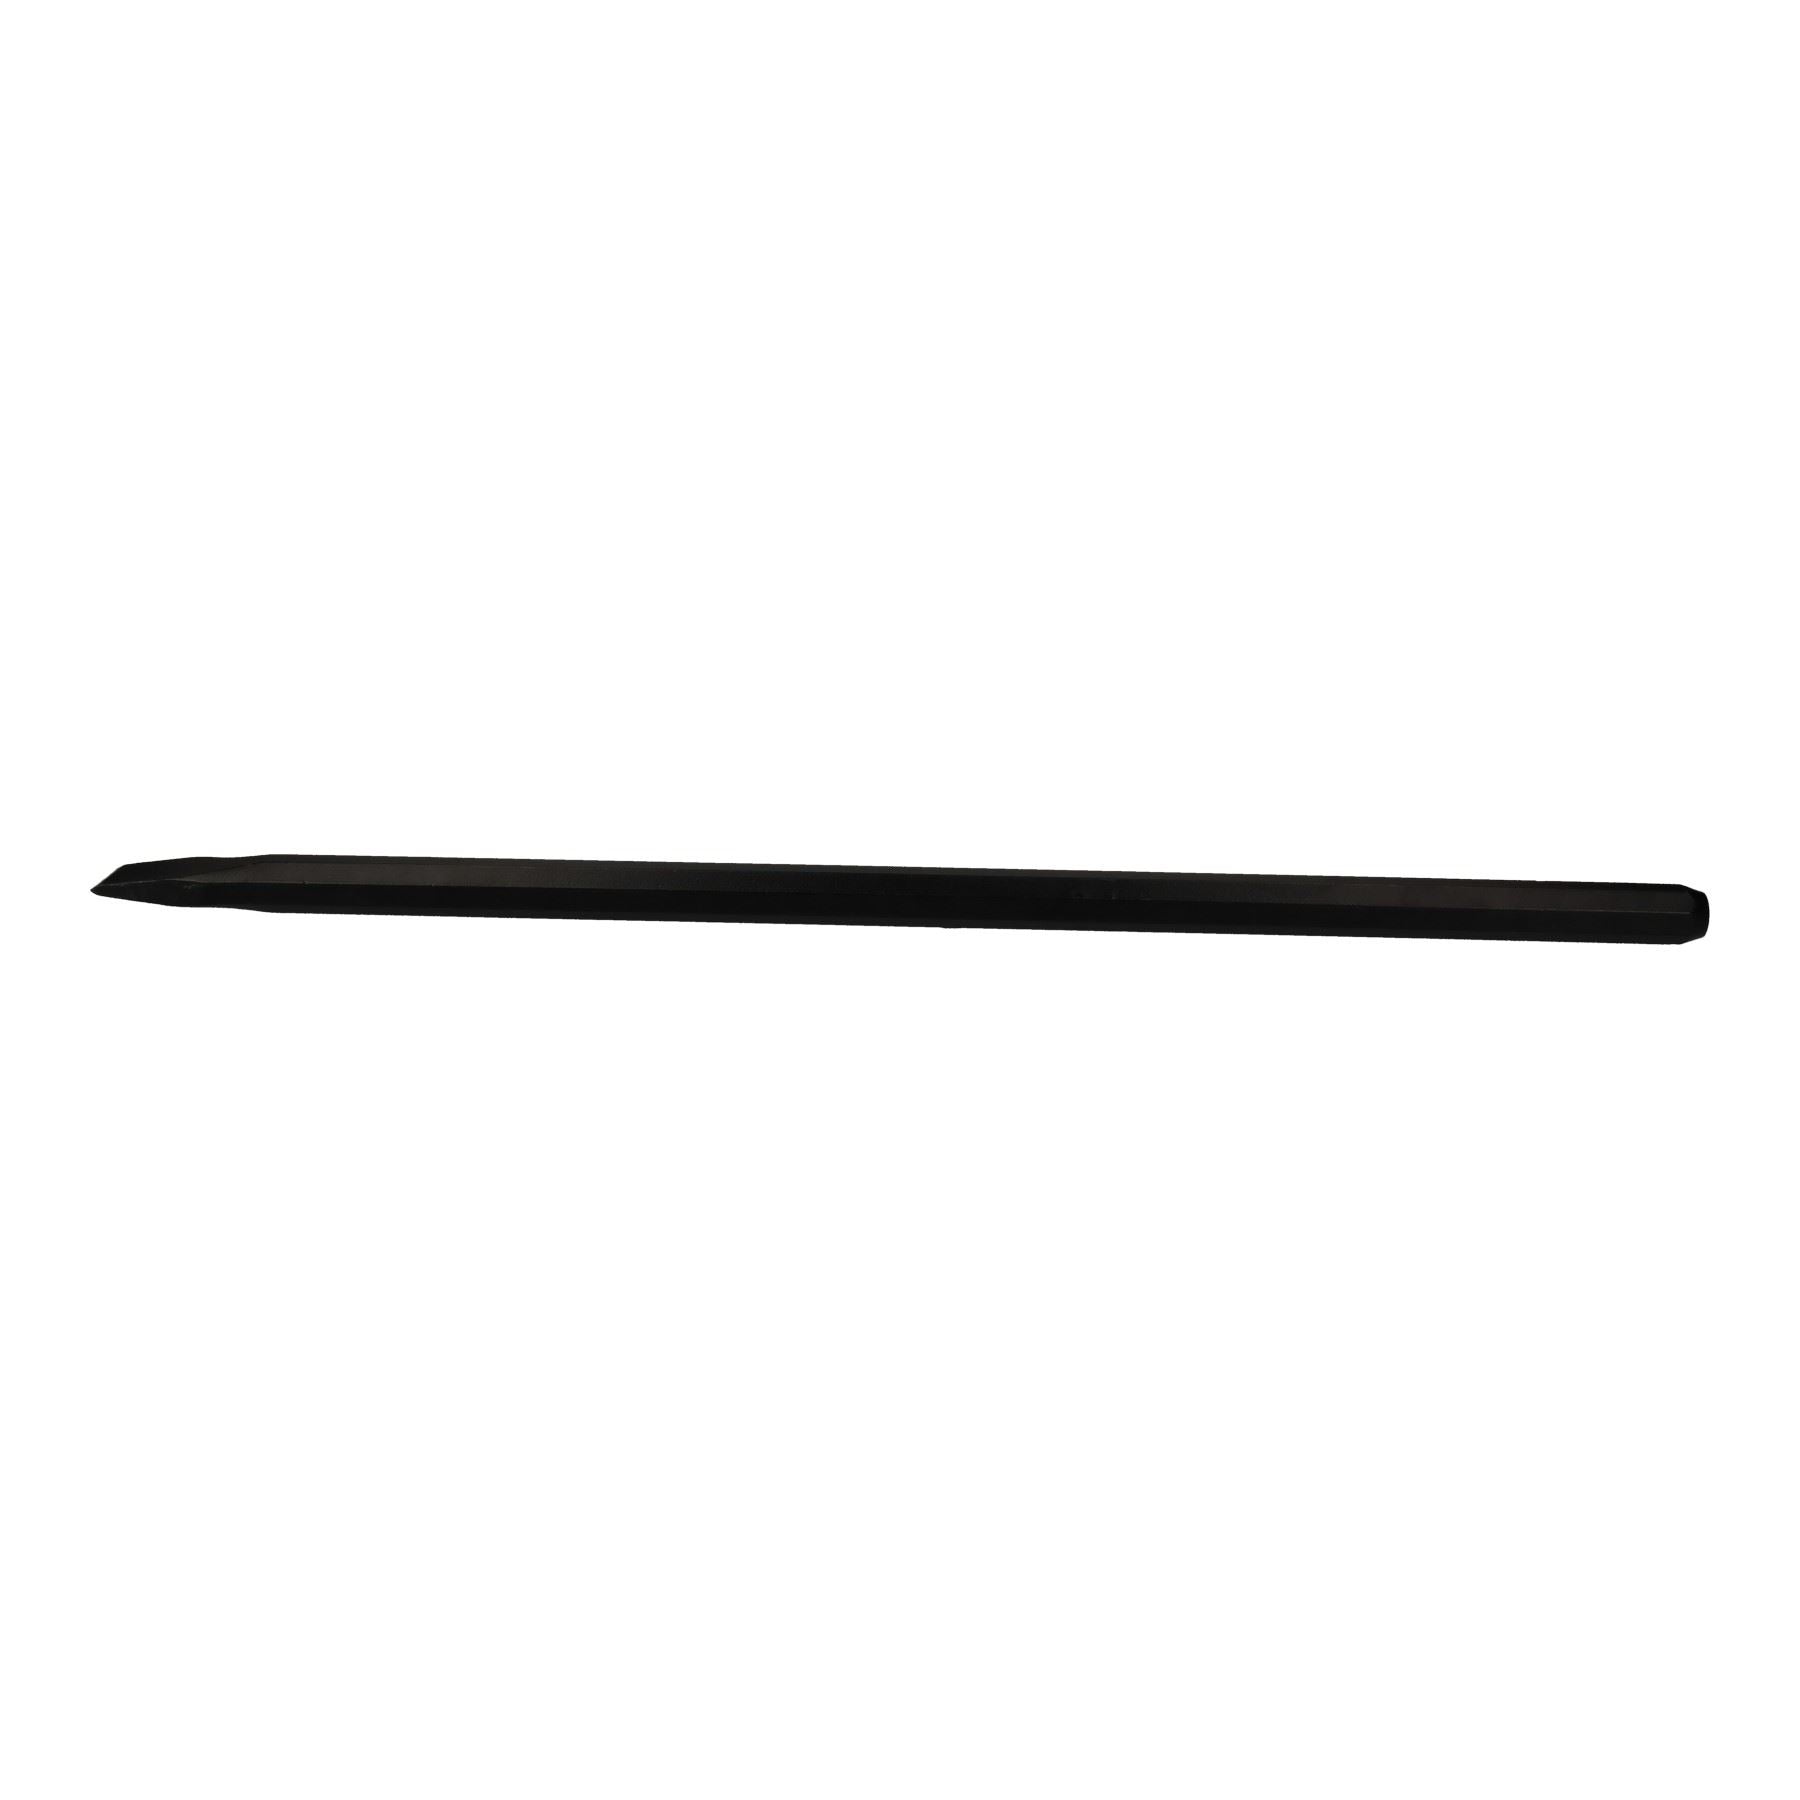 18" x 3/4" Black Cold Chisel hardened Steel Constant For Brick Stone Block Steel